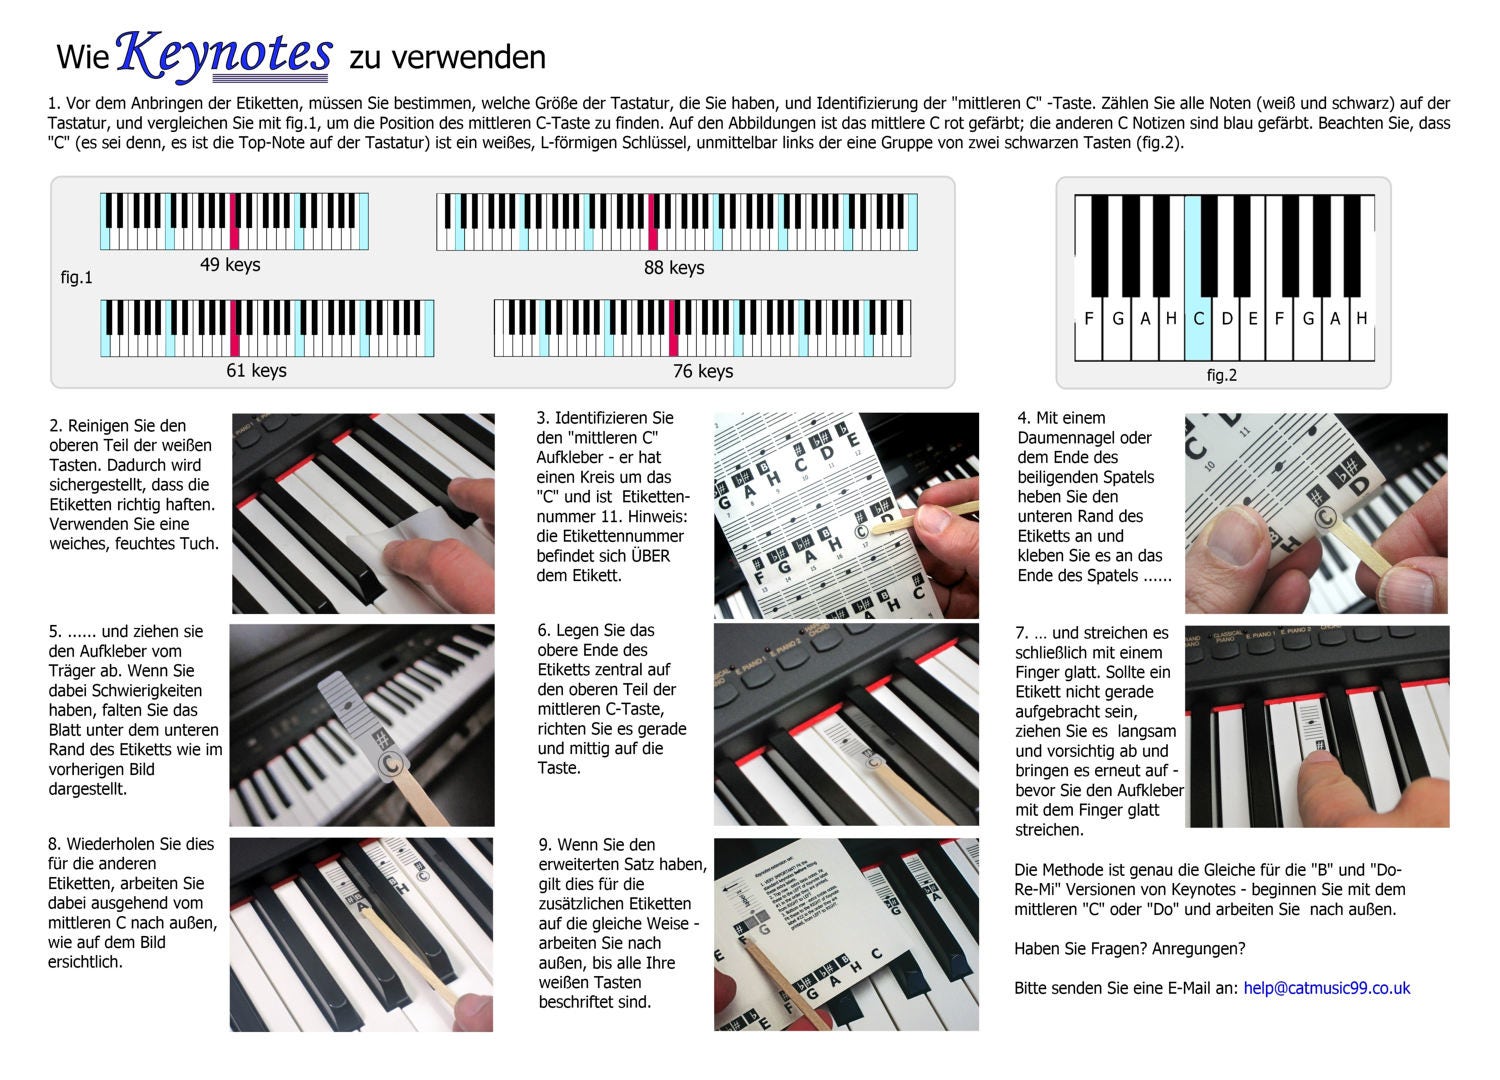 Piano Stickers - Colored Piano Keys With Notes by Hamrah Music